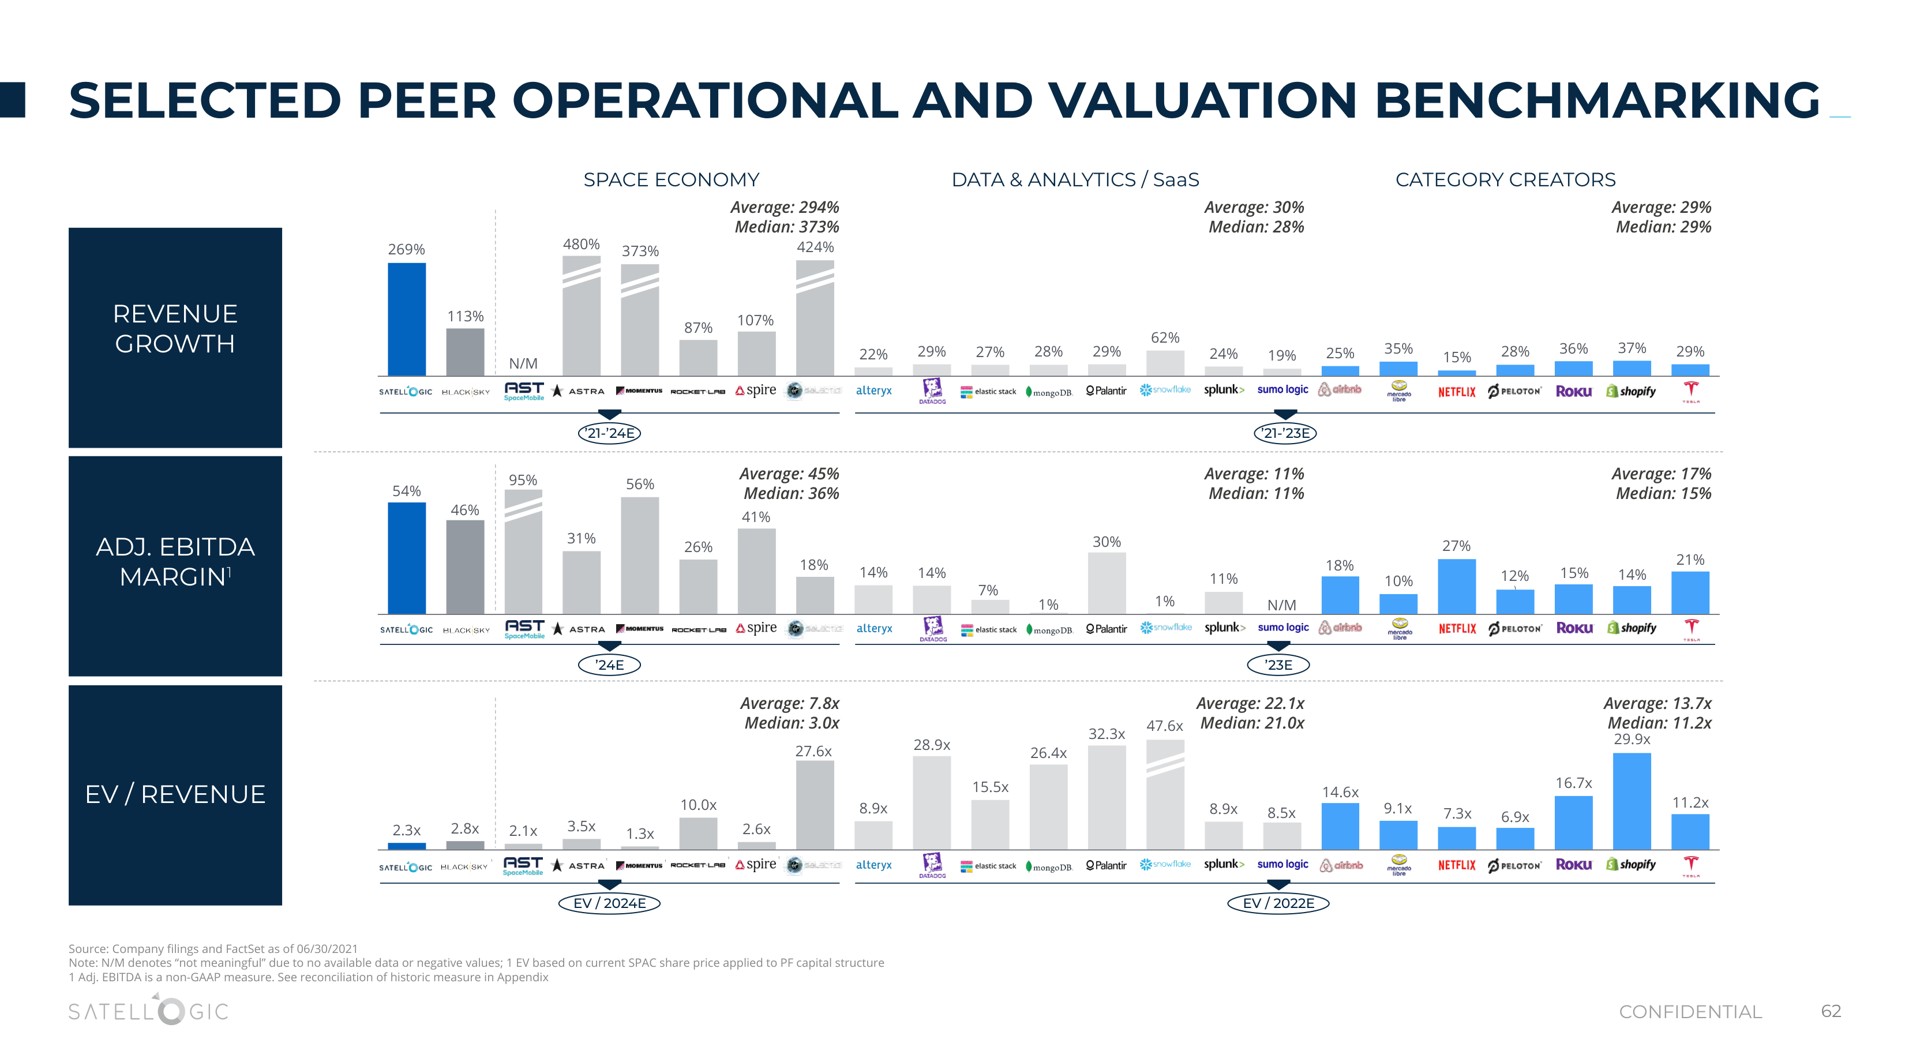 selected peer operational and valuation | Satellogic